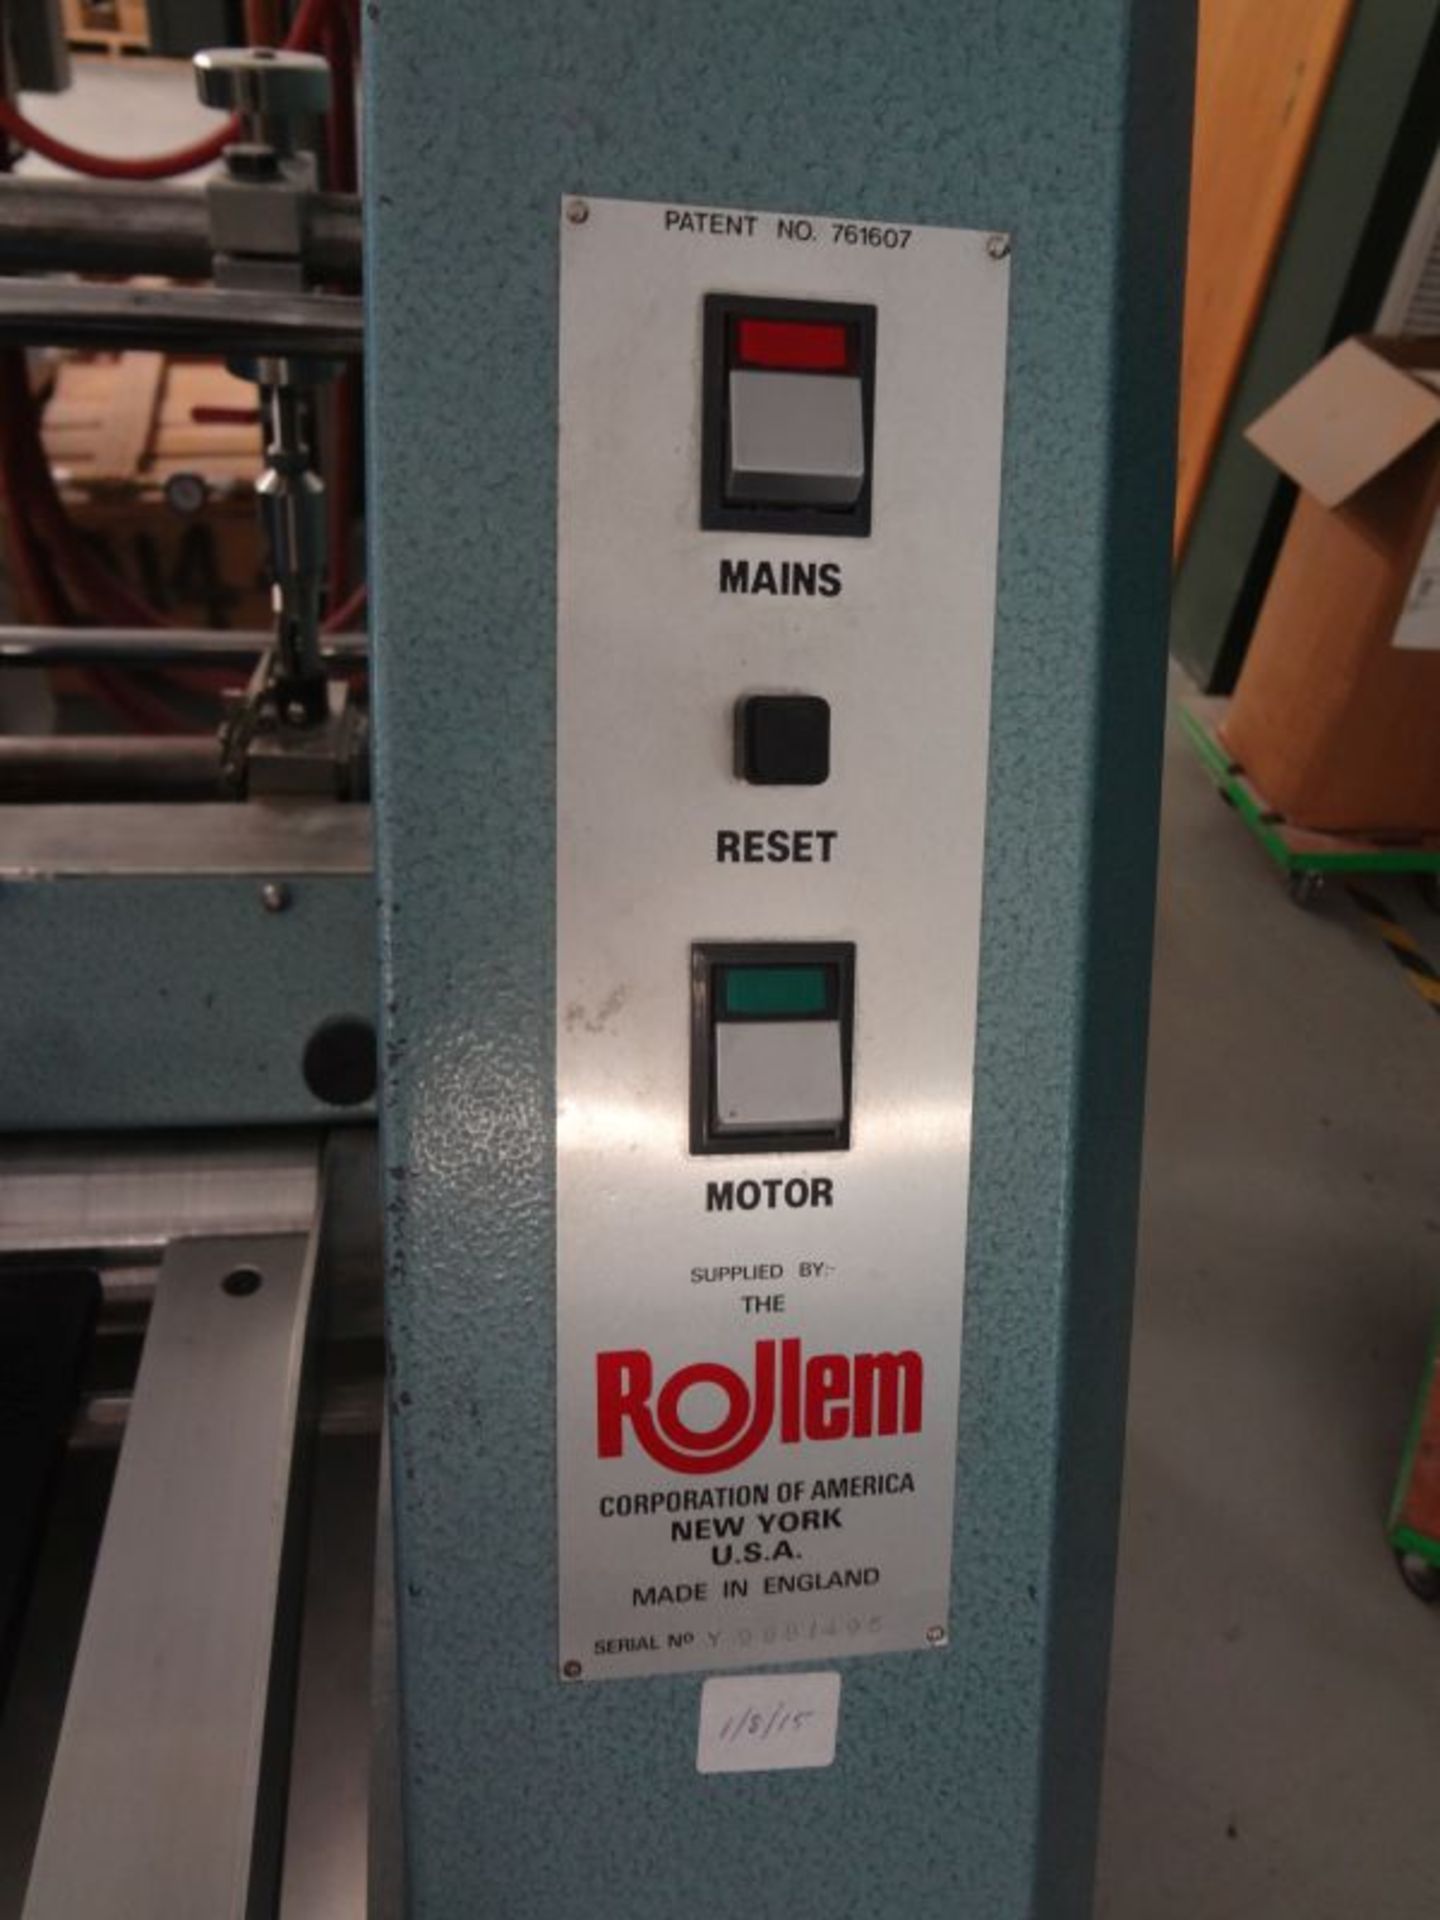 12" ROLLEM NUMBERING MACHINE; S/N T988/495 - Image 2 of 4